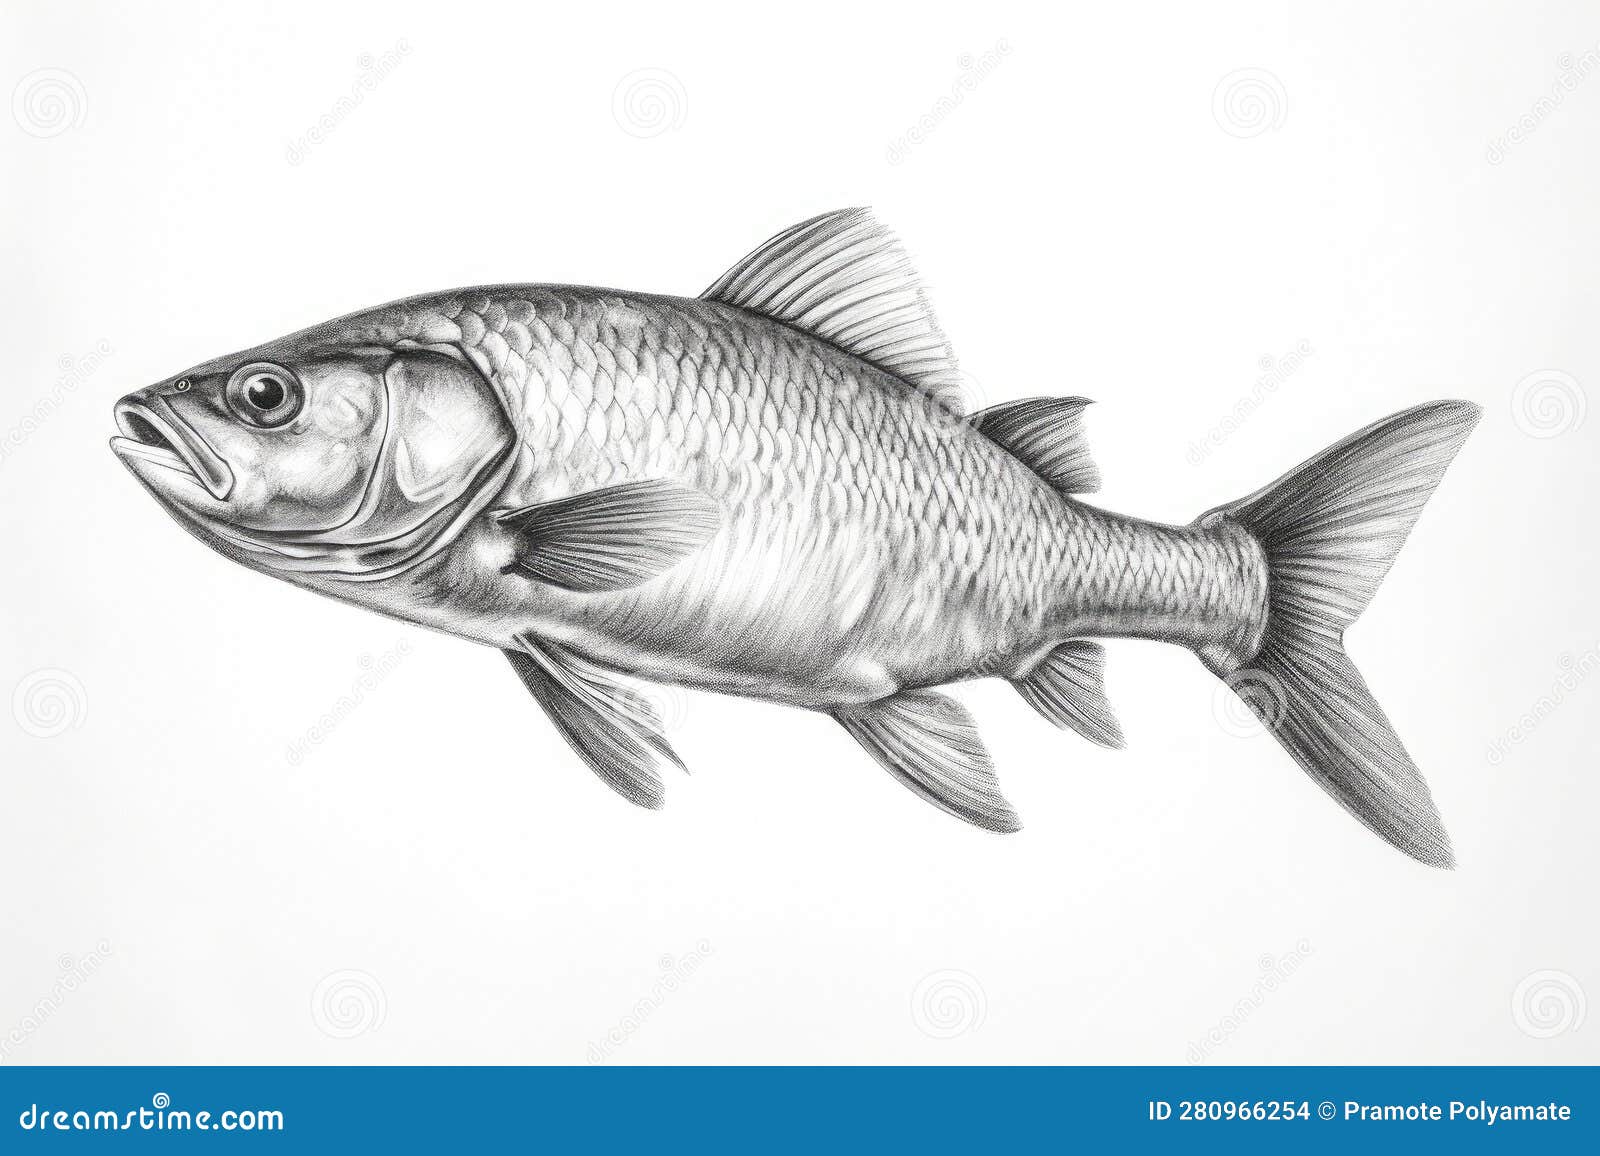 I decided to go into realistic drawing, but I feel that this fish is  missing a lot of detail. How can I improve? : r/learntodraw